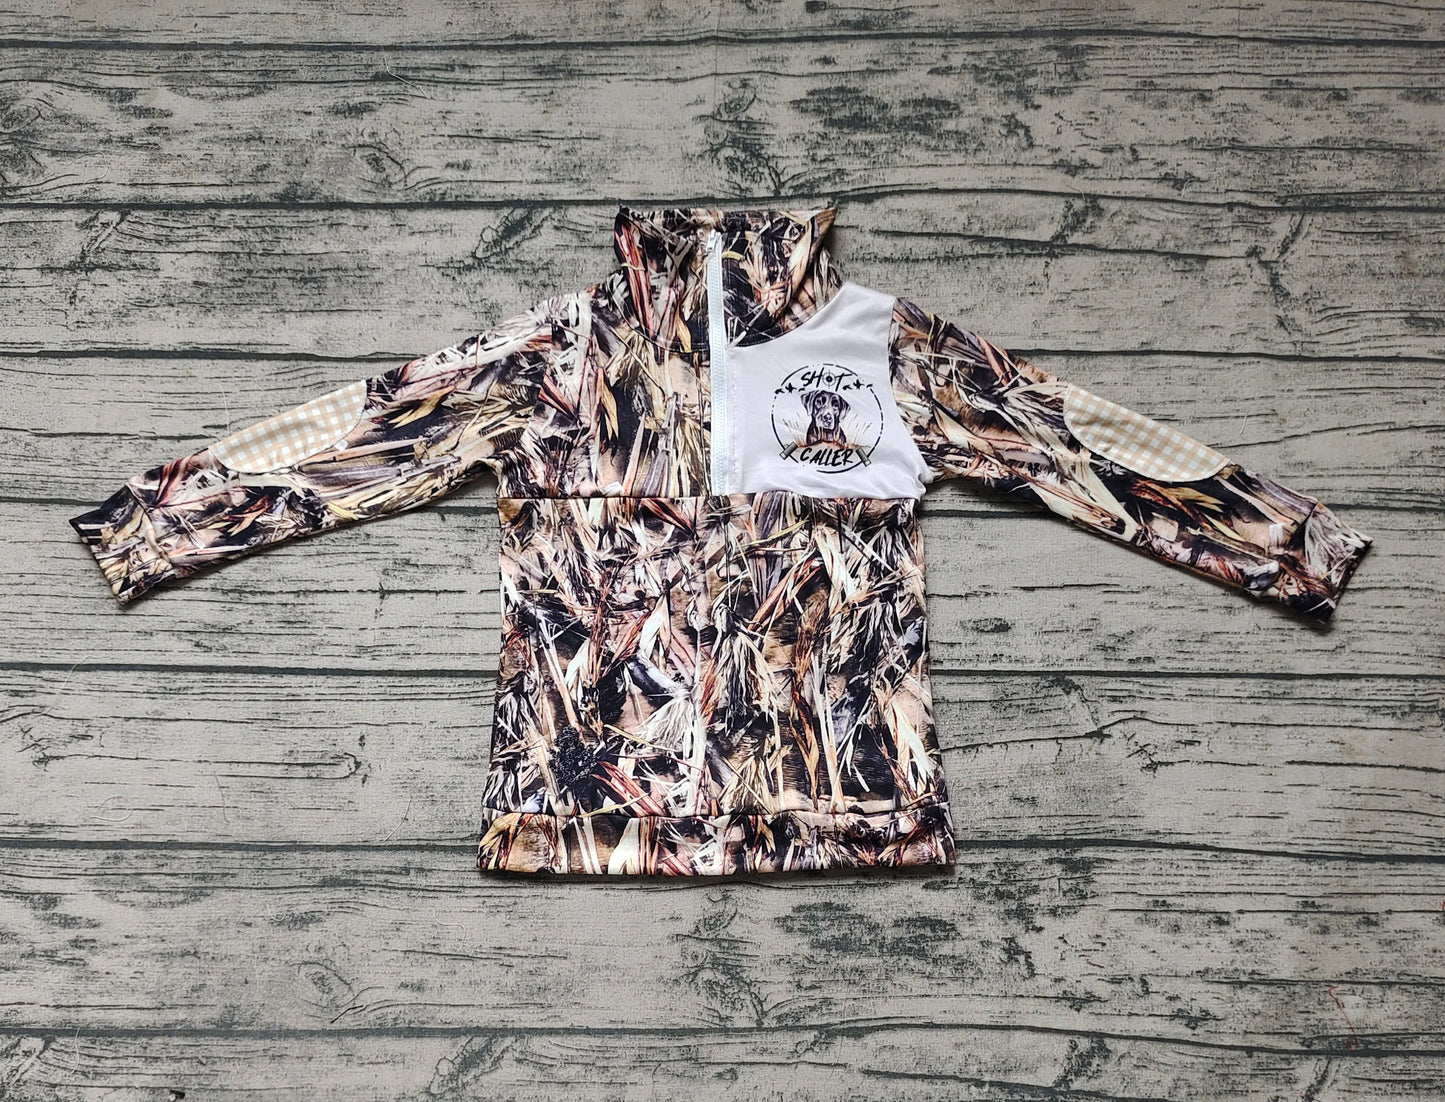 Baby Boys Camo Hunting Dog Zip Pullover Tops